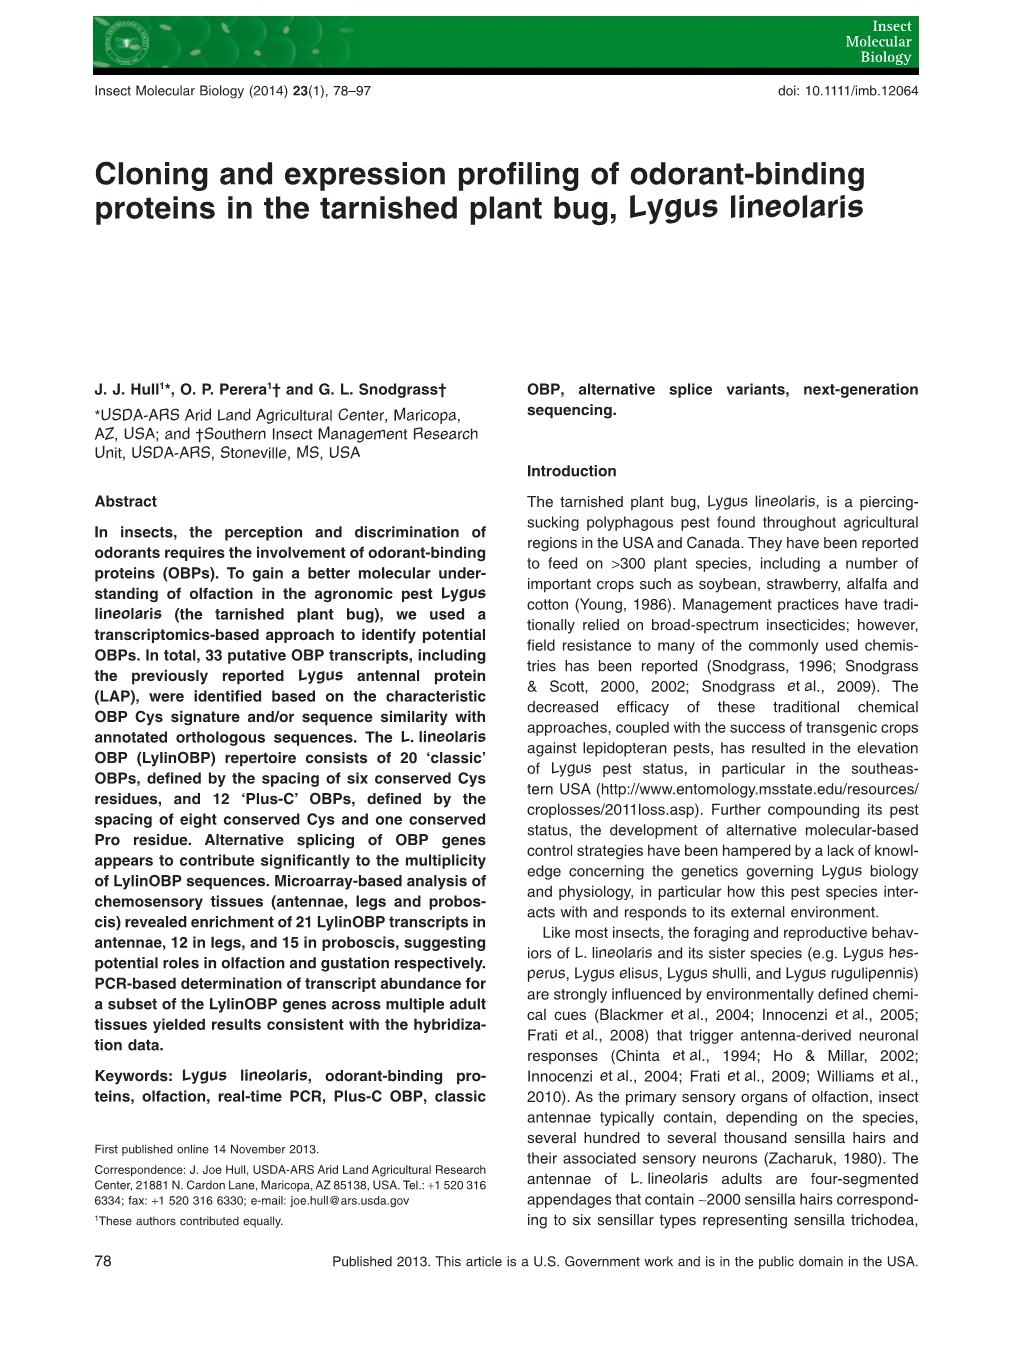 Cloning and Expression Profiling of Odorantbinding Proteins in the Tarnished Plant Bug, Lygus Lineolaris